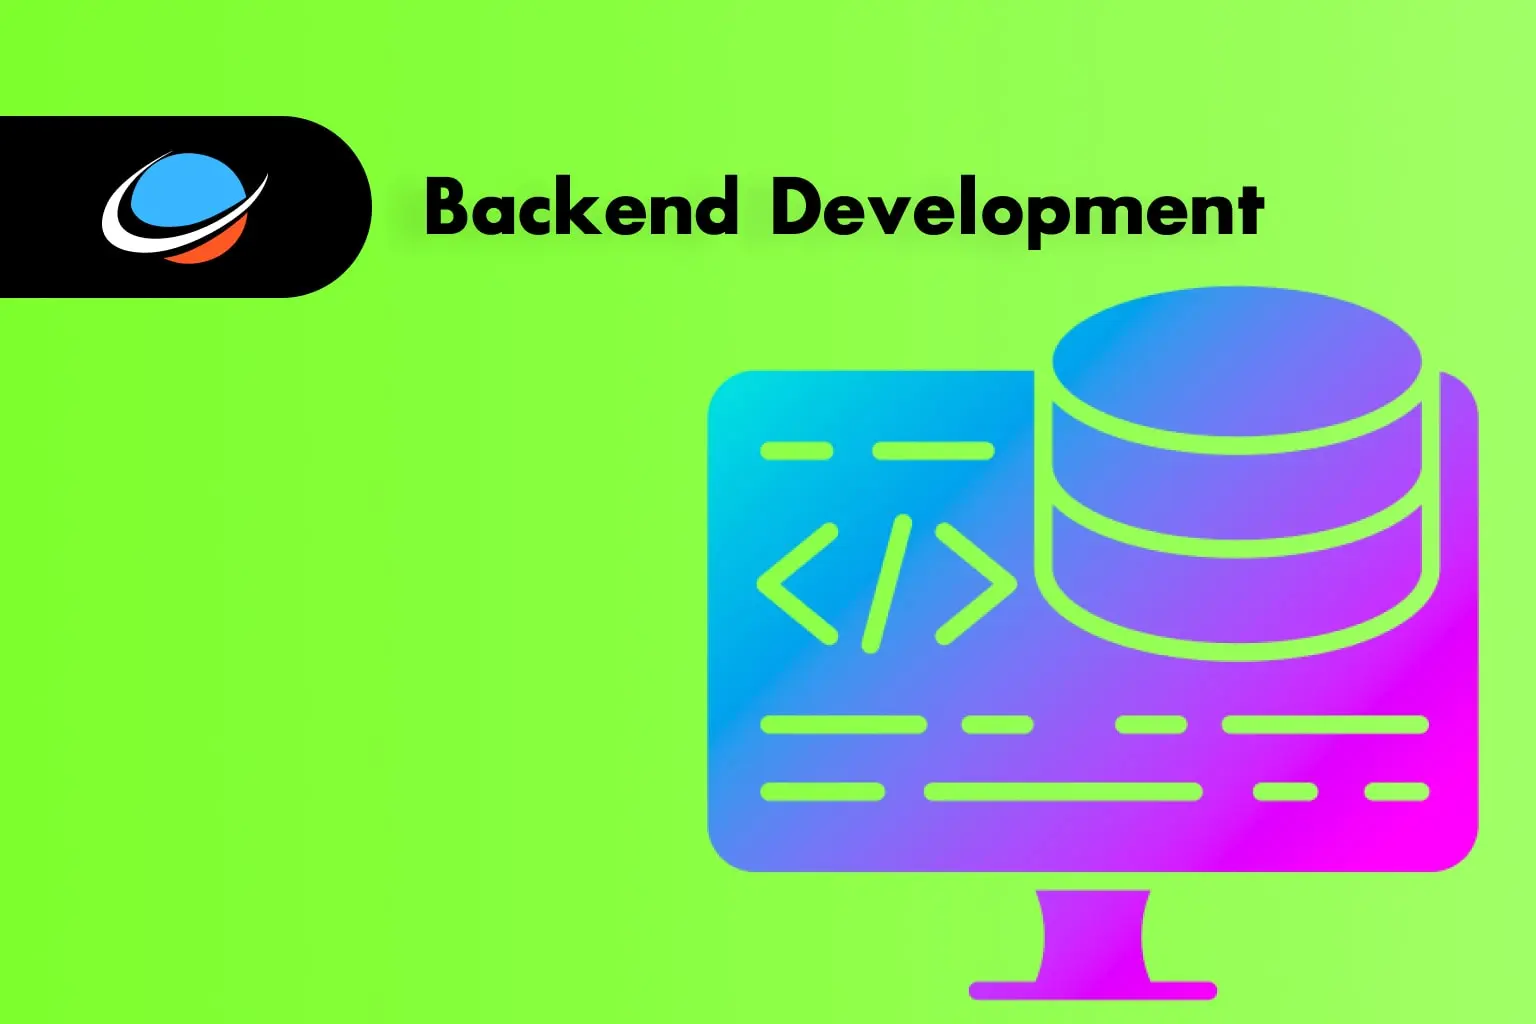 Backend Development. Witness your visions come to life as we deliver dynamic web solutions and applications tailored to your unique business needs. Elevate your online presence with Air Global Tech's Backend Development expertise!